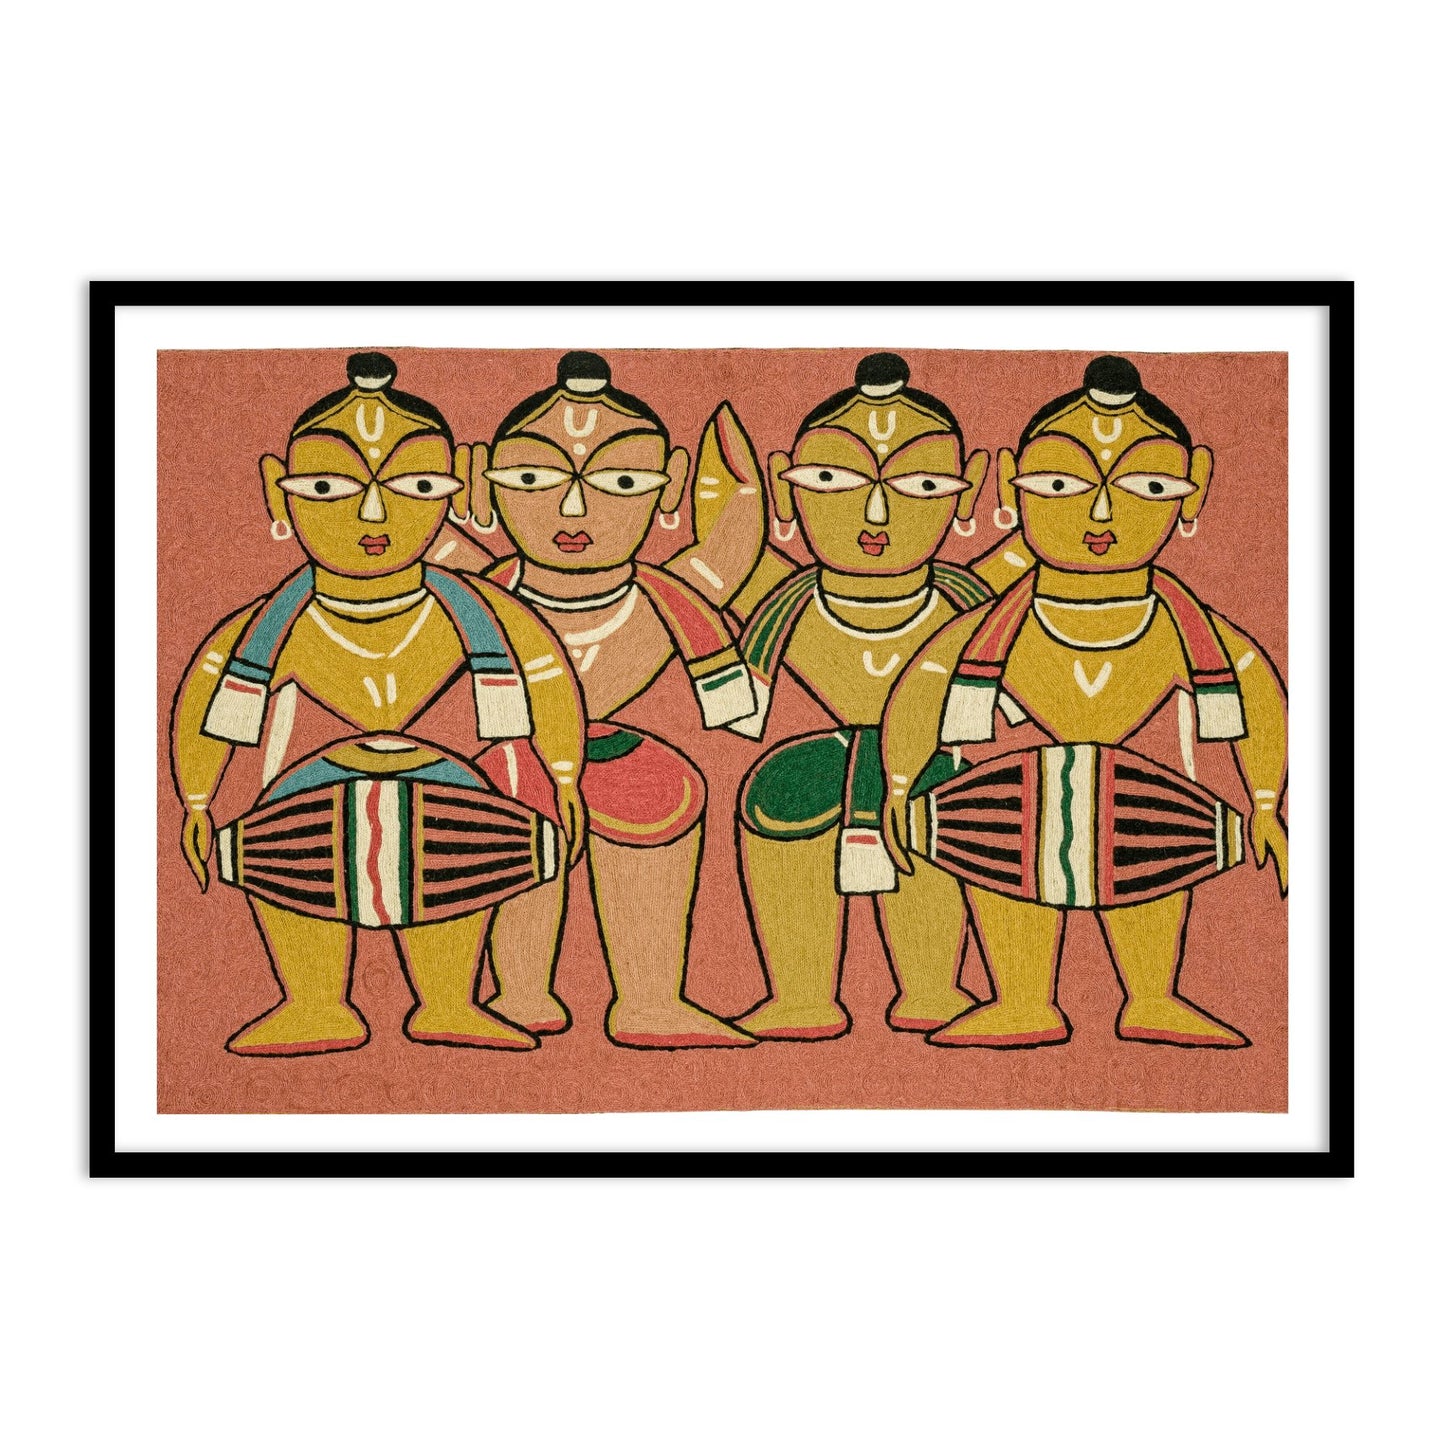 Untitled (Musician) Wall Art Painting Print by Jamini Roy for Home Decor